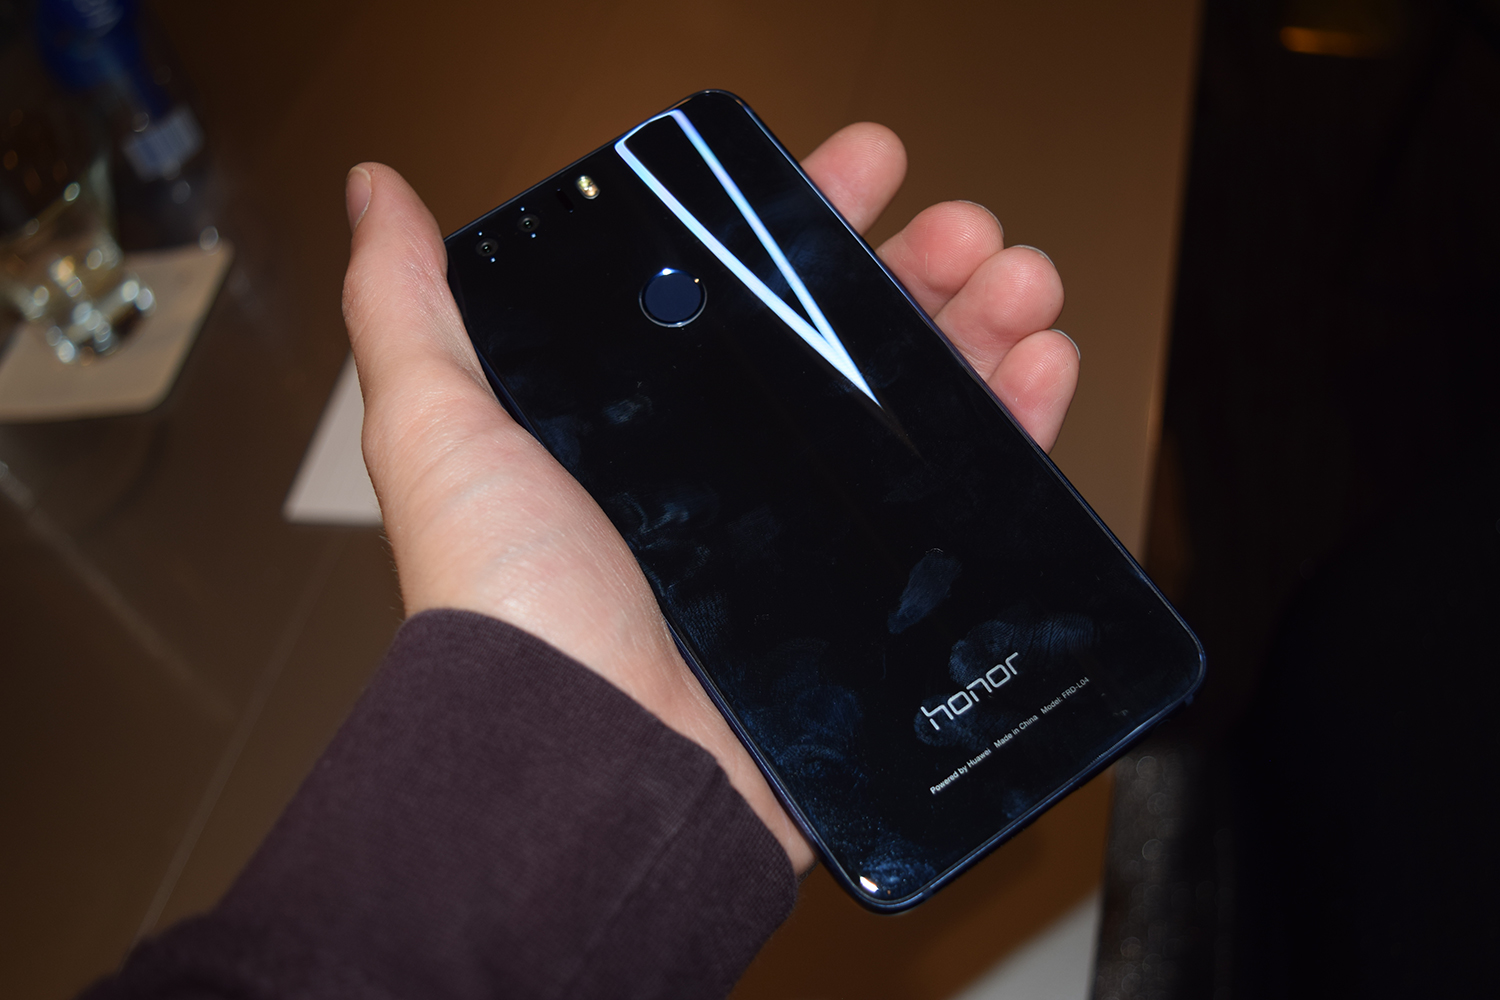 huawei honor 8 hands on